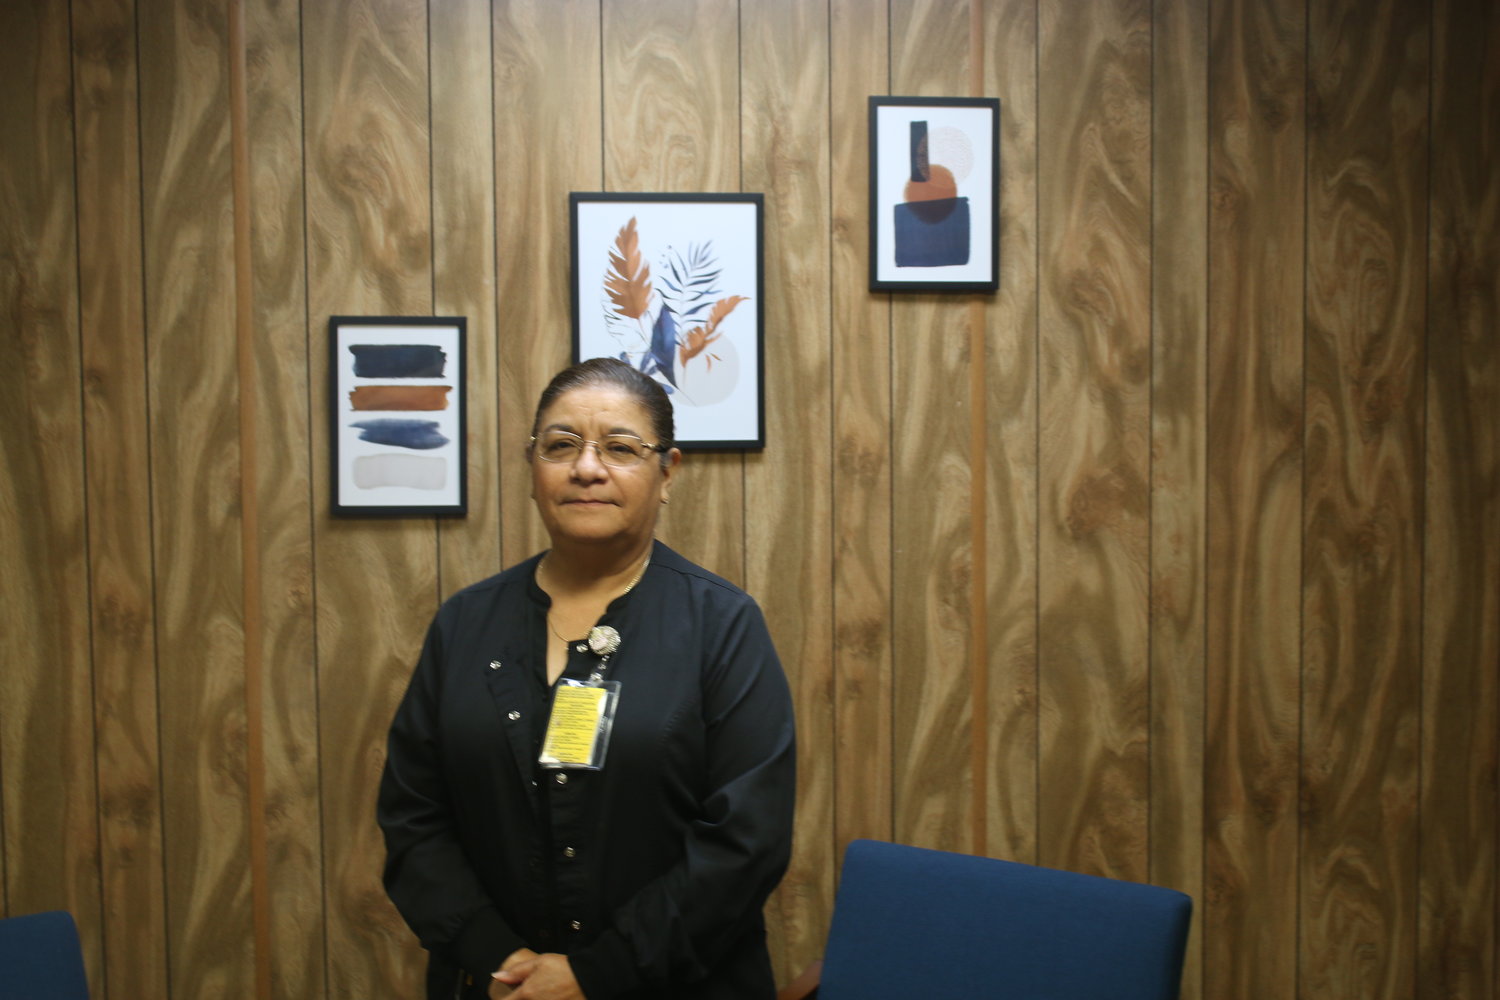 Antonia Gonzales, affectionately known as Toni, has been with Gonzales Healthcare Systems since 1978.